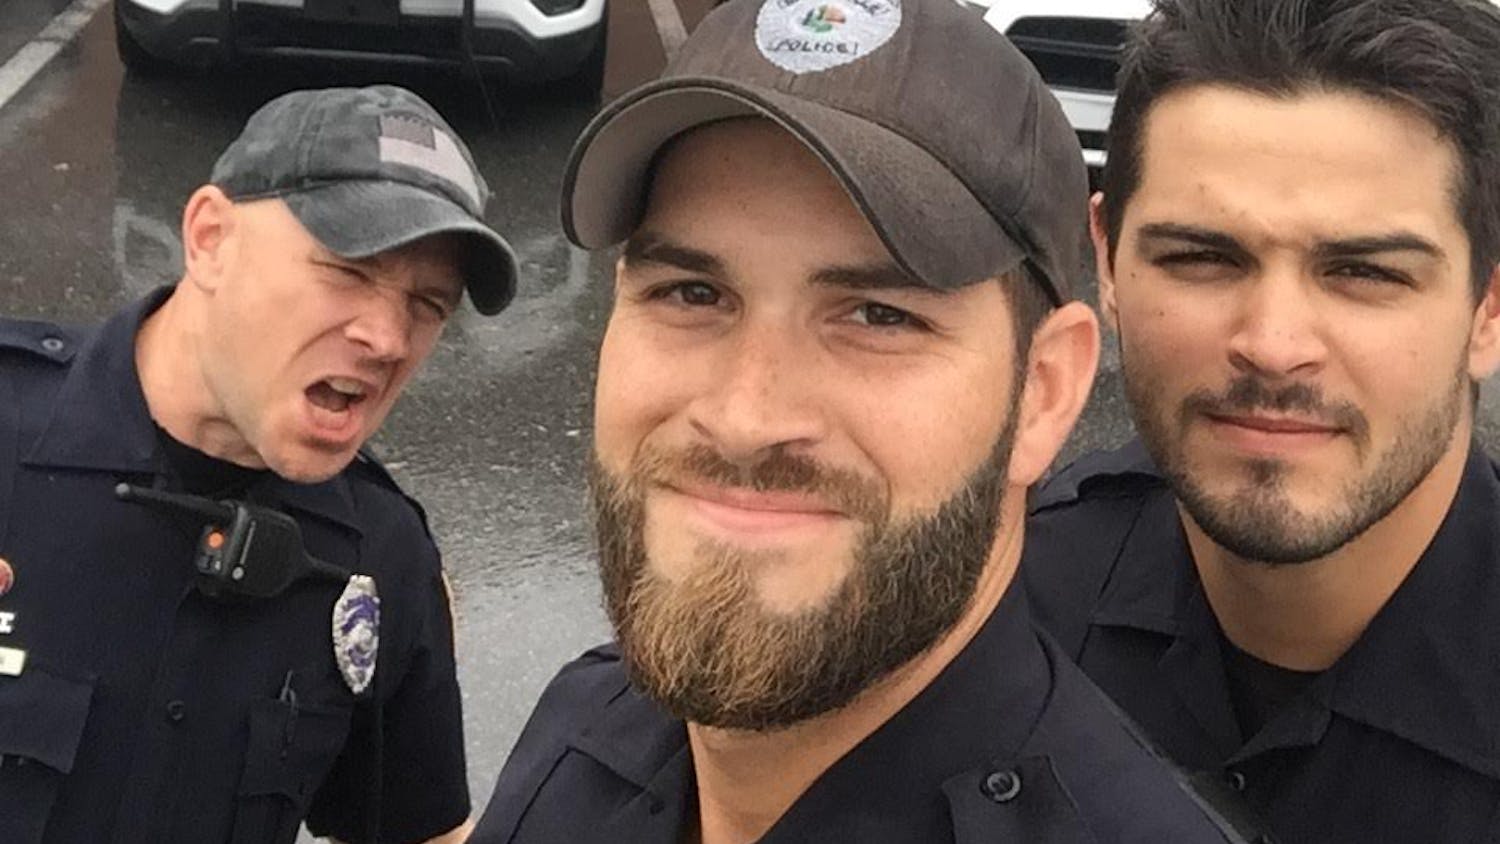 SWAT Officer Daniel Rengering, right, will report live from the Grammys for PopWrapped TV. Rengering said he will also be a host at the Screen Actors Guild Awards on Jan. 27 and will be a guest speaker at the 91st Annual Rudolph Valentino Memorial in August.